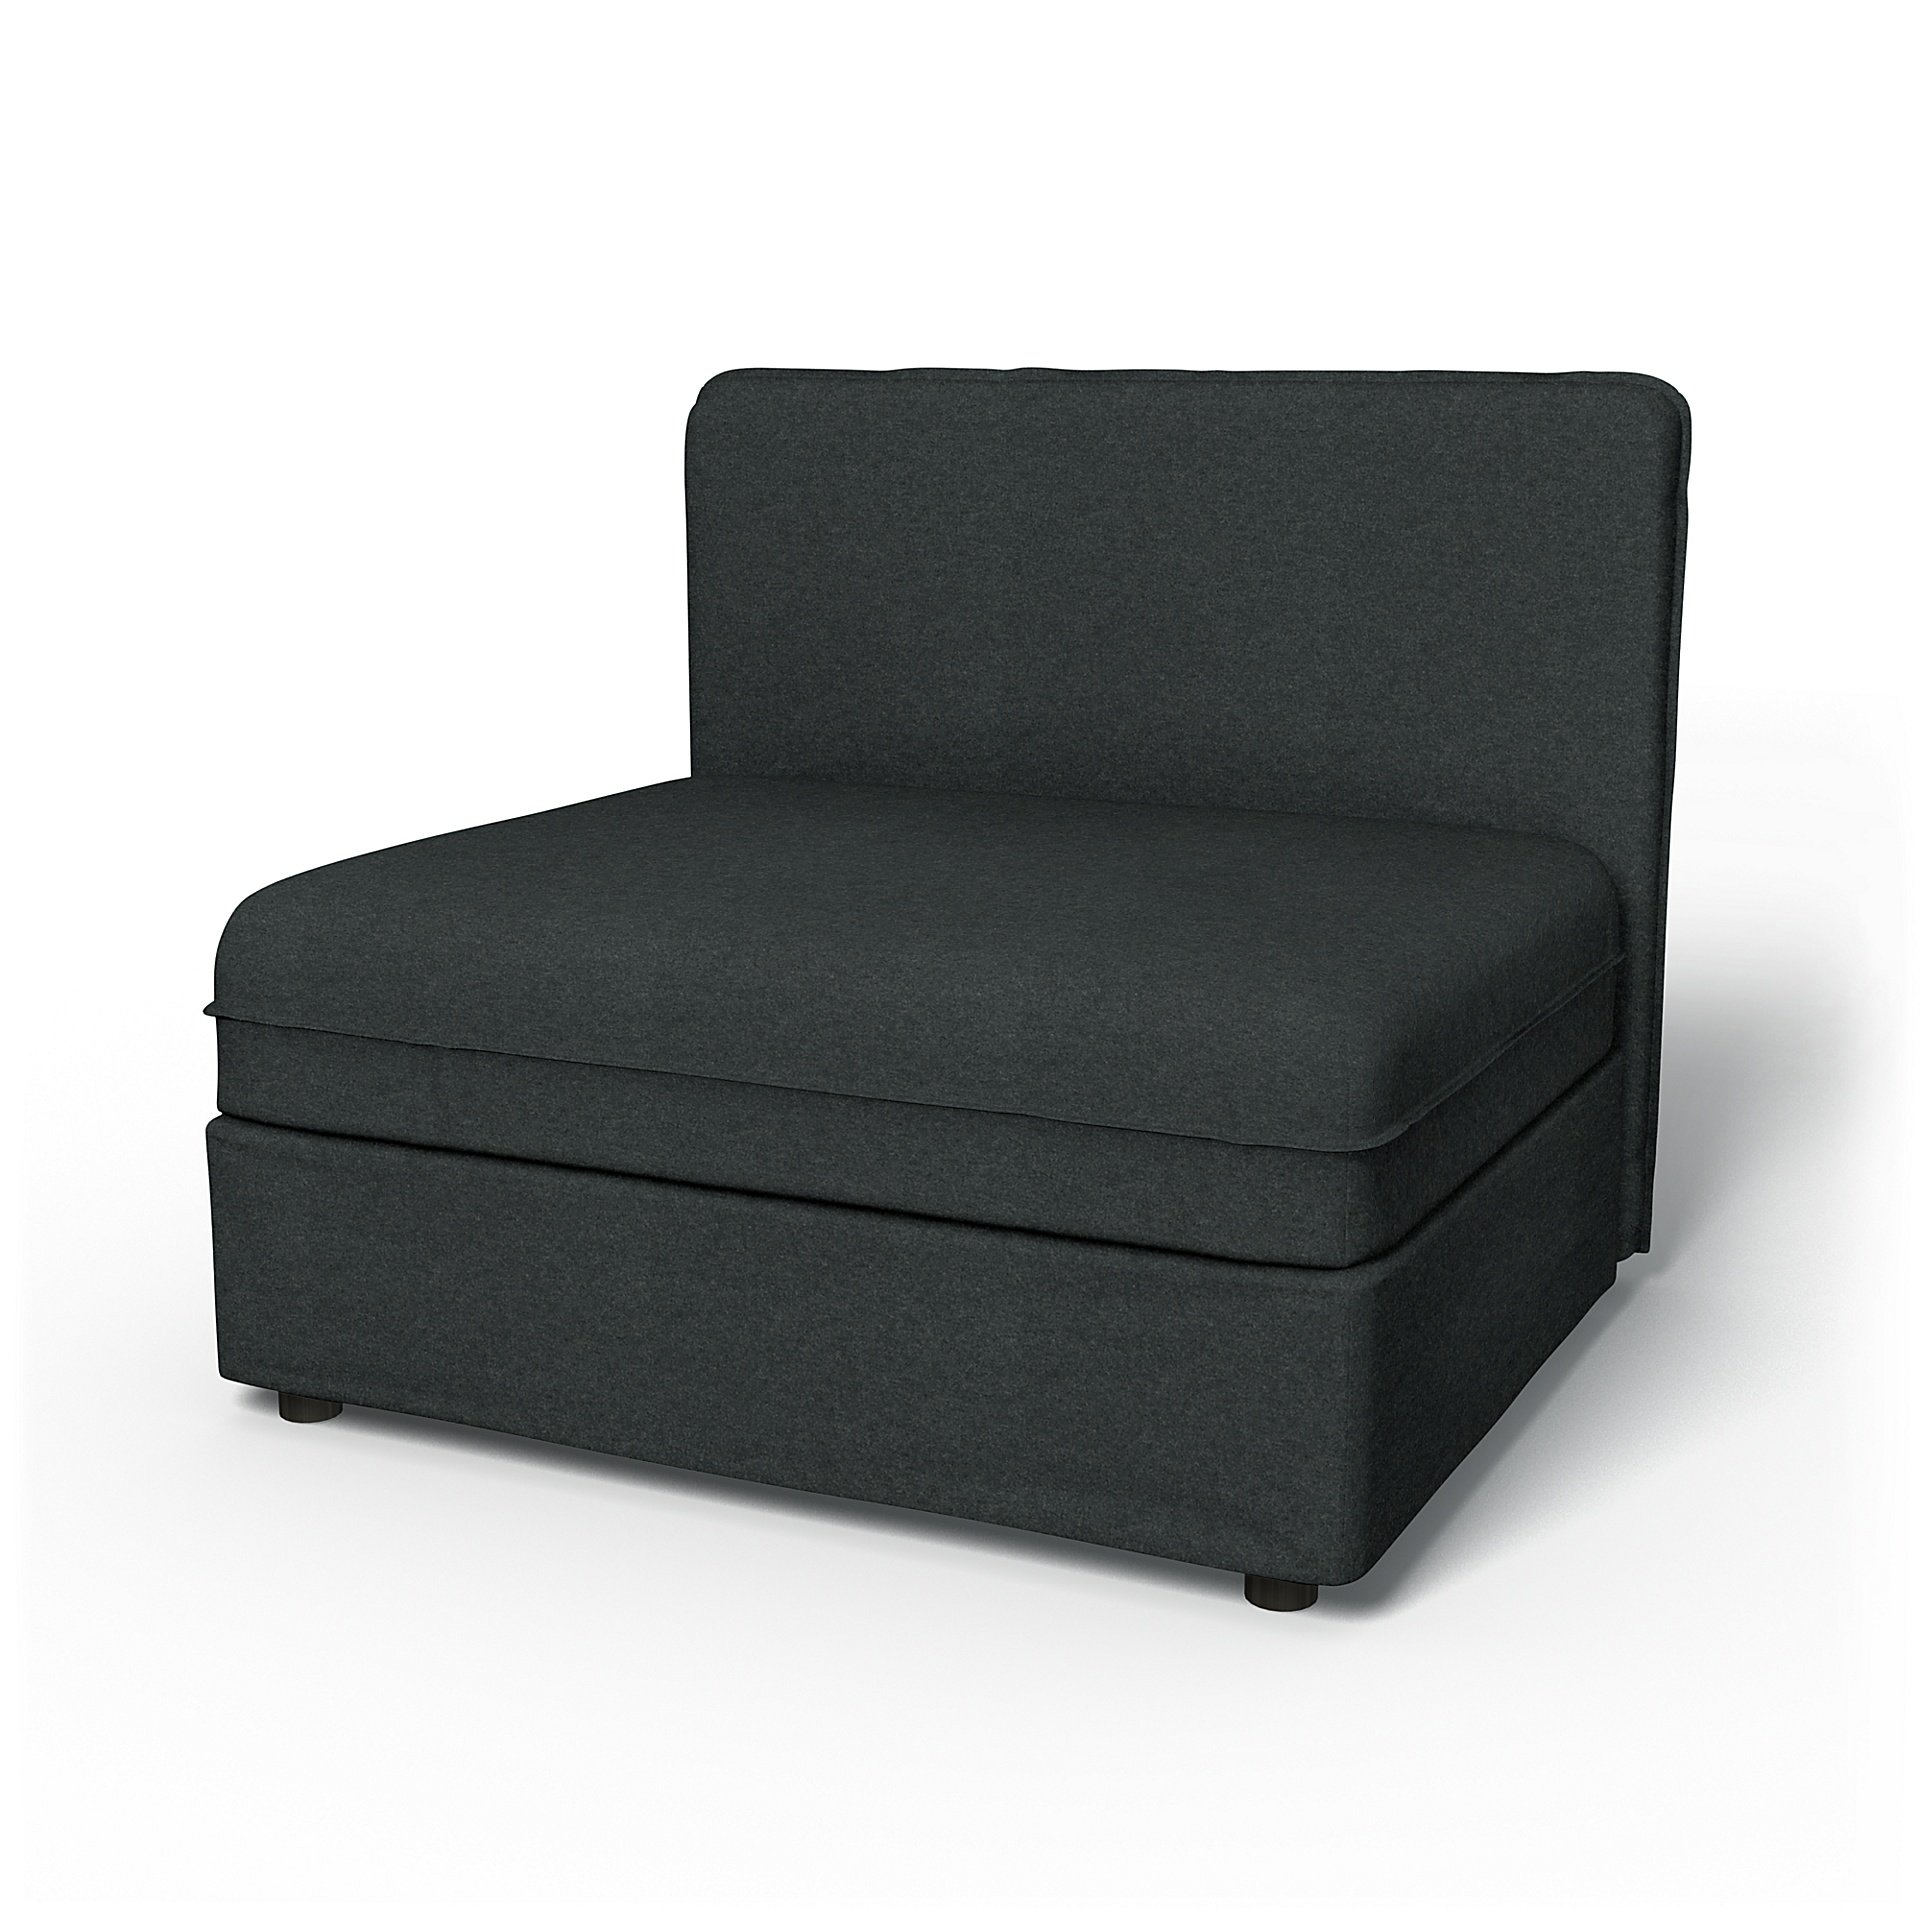 IKEA - Vallentuna Seat Module with Low Back Cover 100x80cm 39x32in, Stone, Wool - Bemz